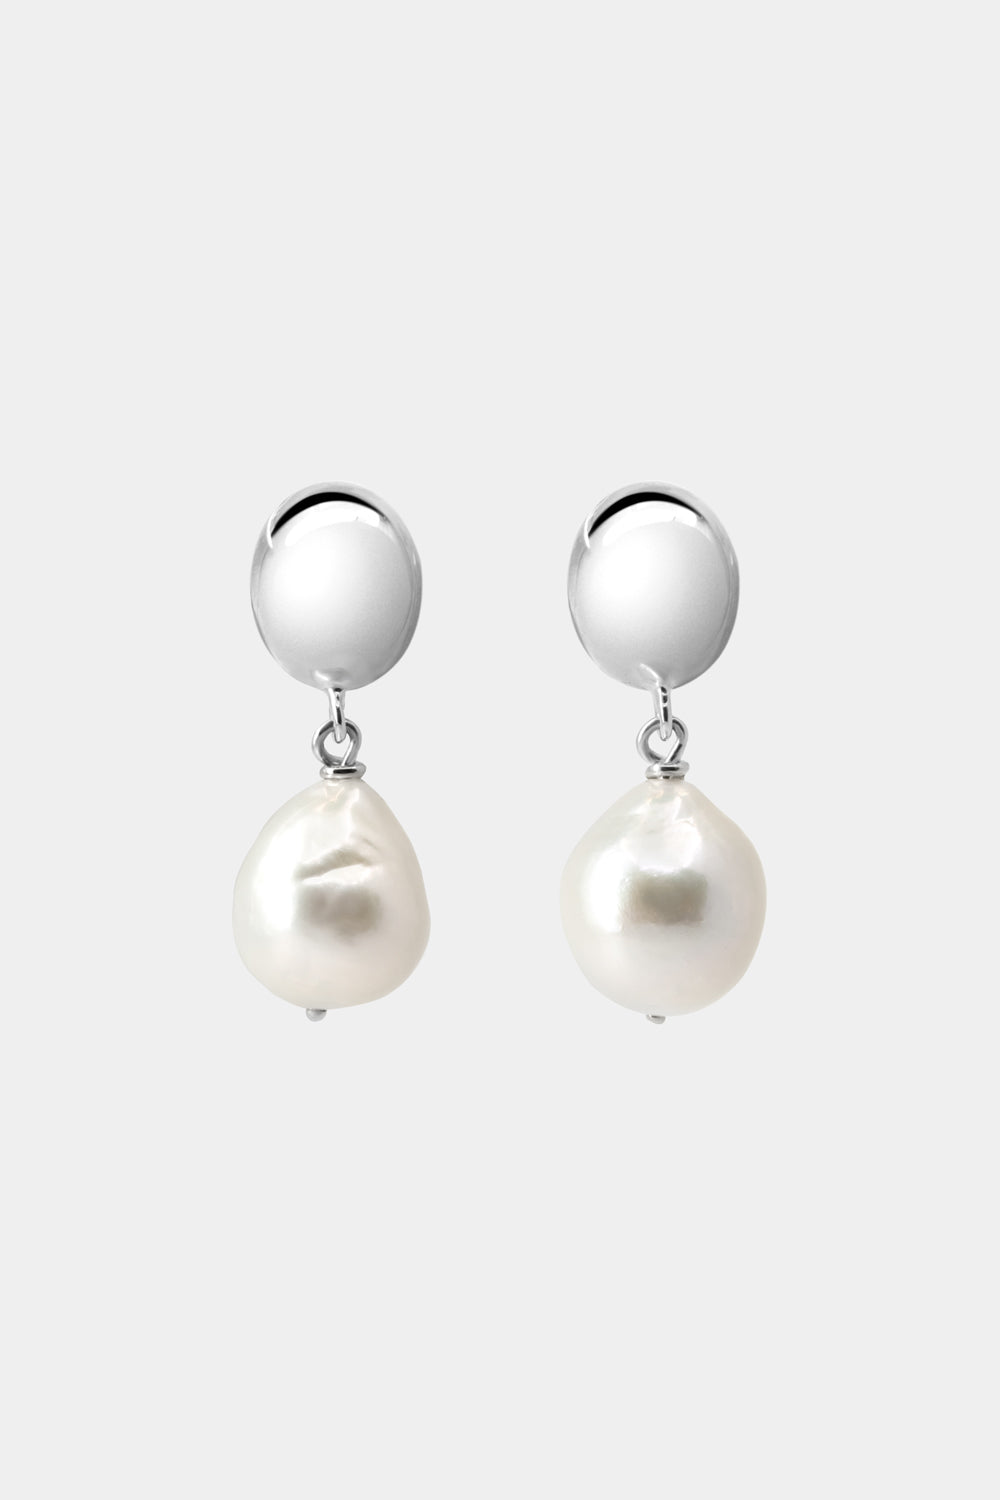 Vivienne Baroque Pearl Earrings | Silver or 9K White Gold, More Options Available